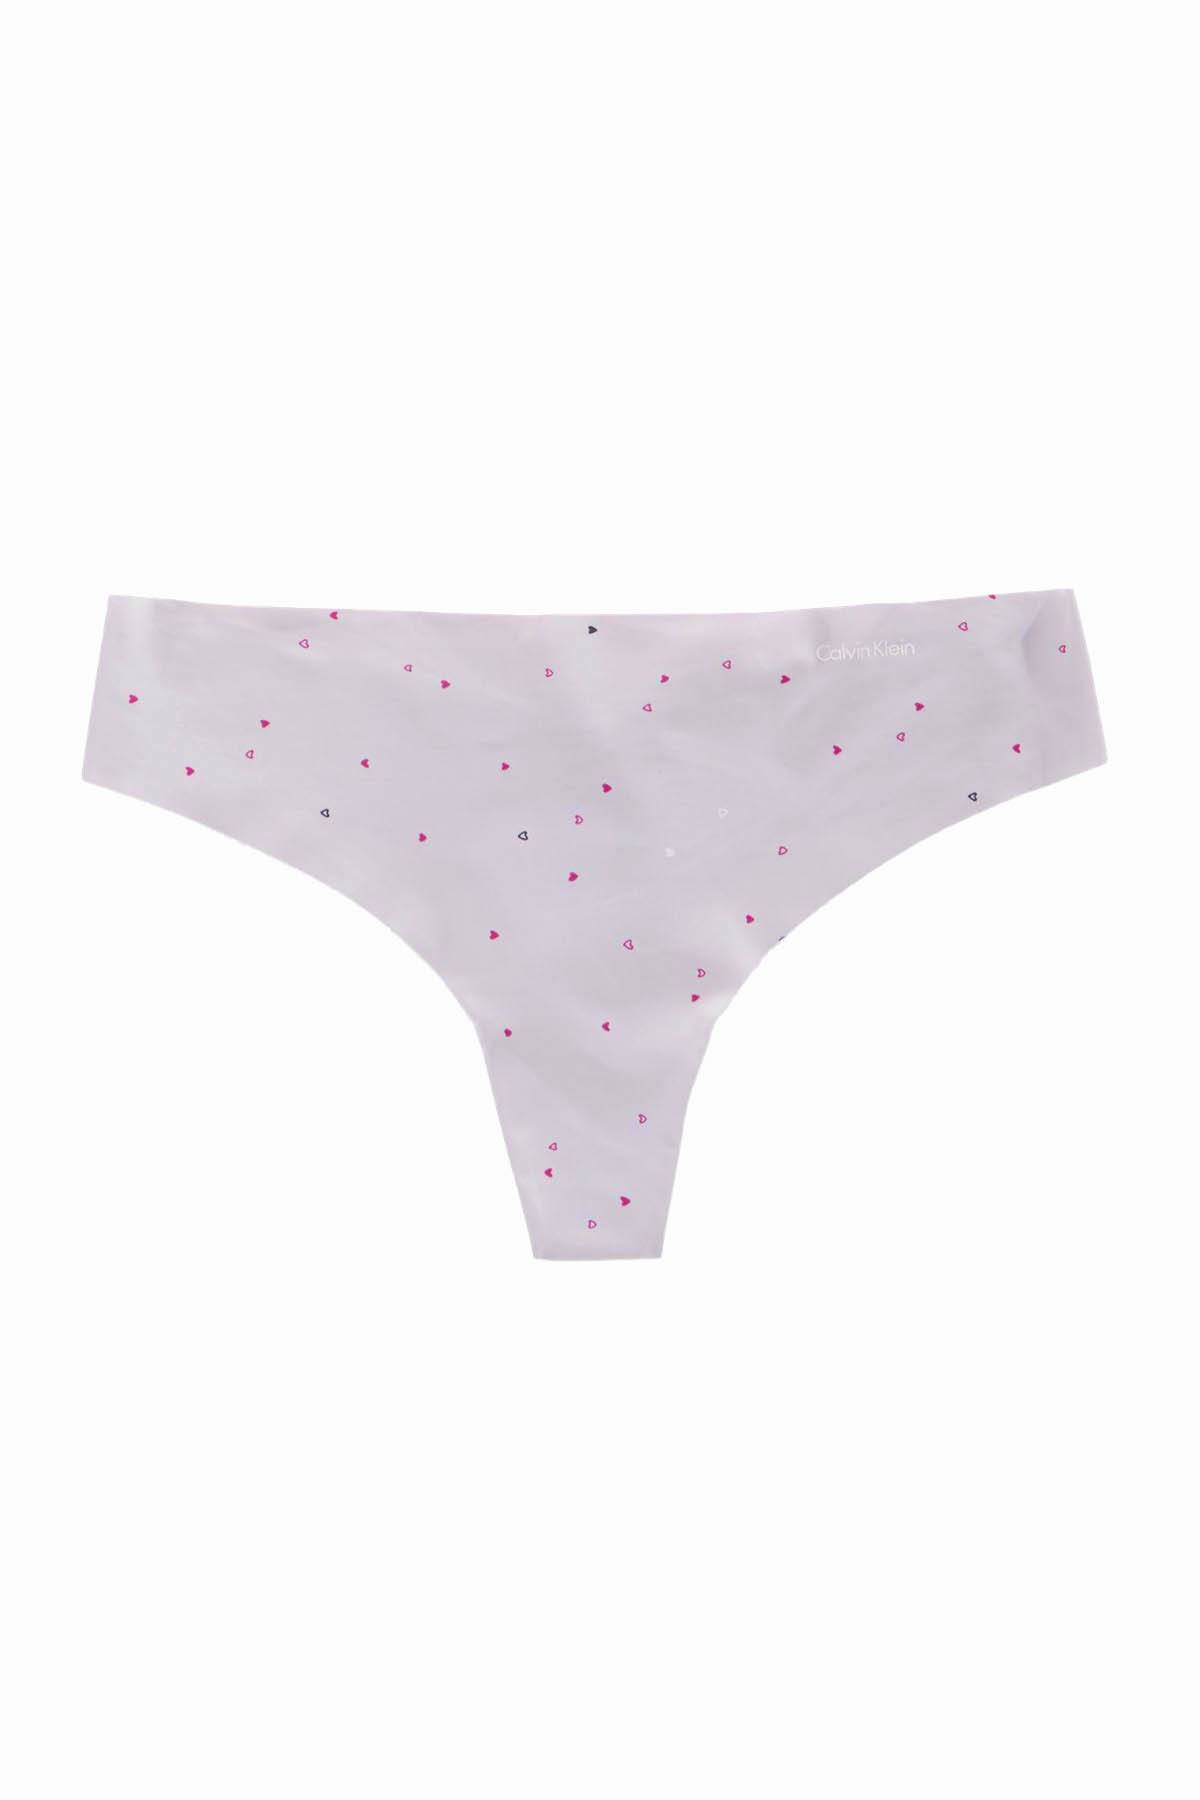 Calvin Klein Scattered-Hearts Wonder Invisibles Thong